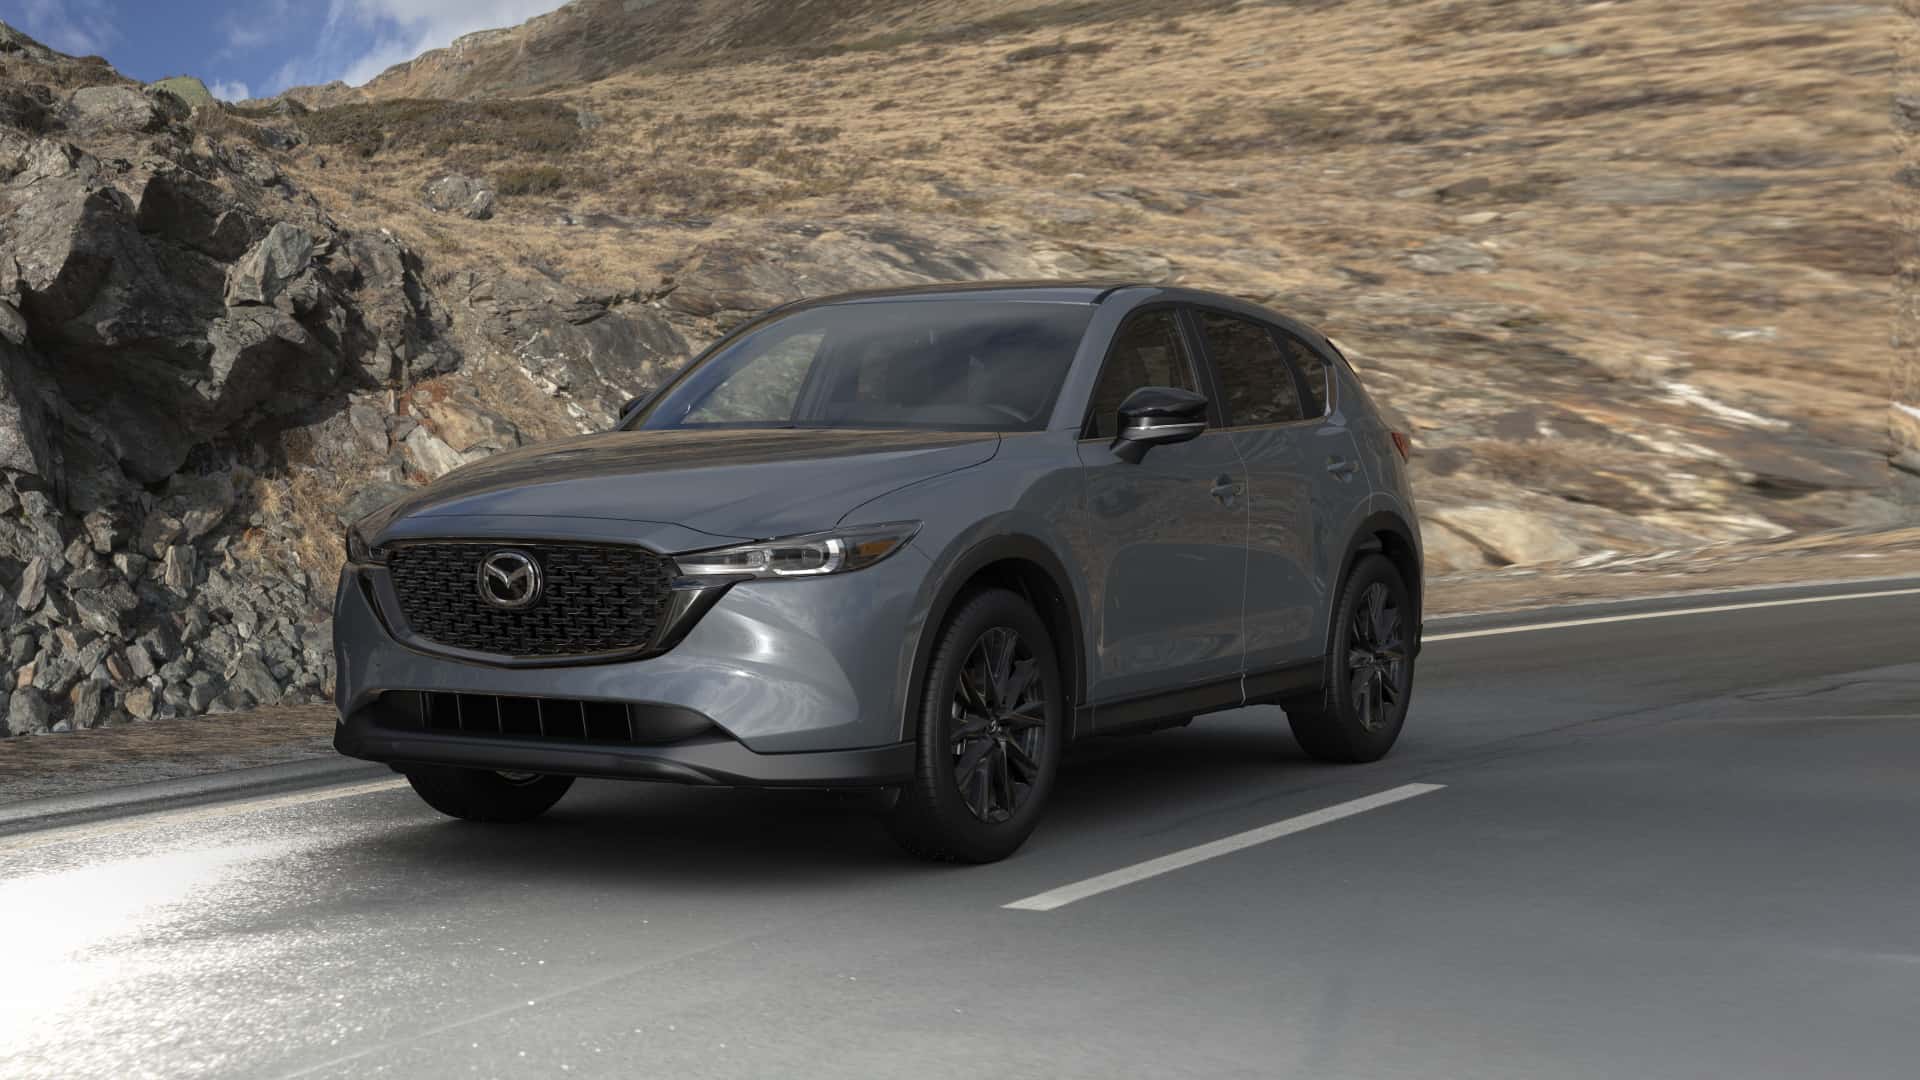 2023 Mazda CX-5 2.5 S Carbon Edition Polymetal Gray Metallic | Neil Huffman Mazda in Louisville KY